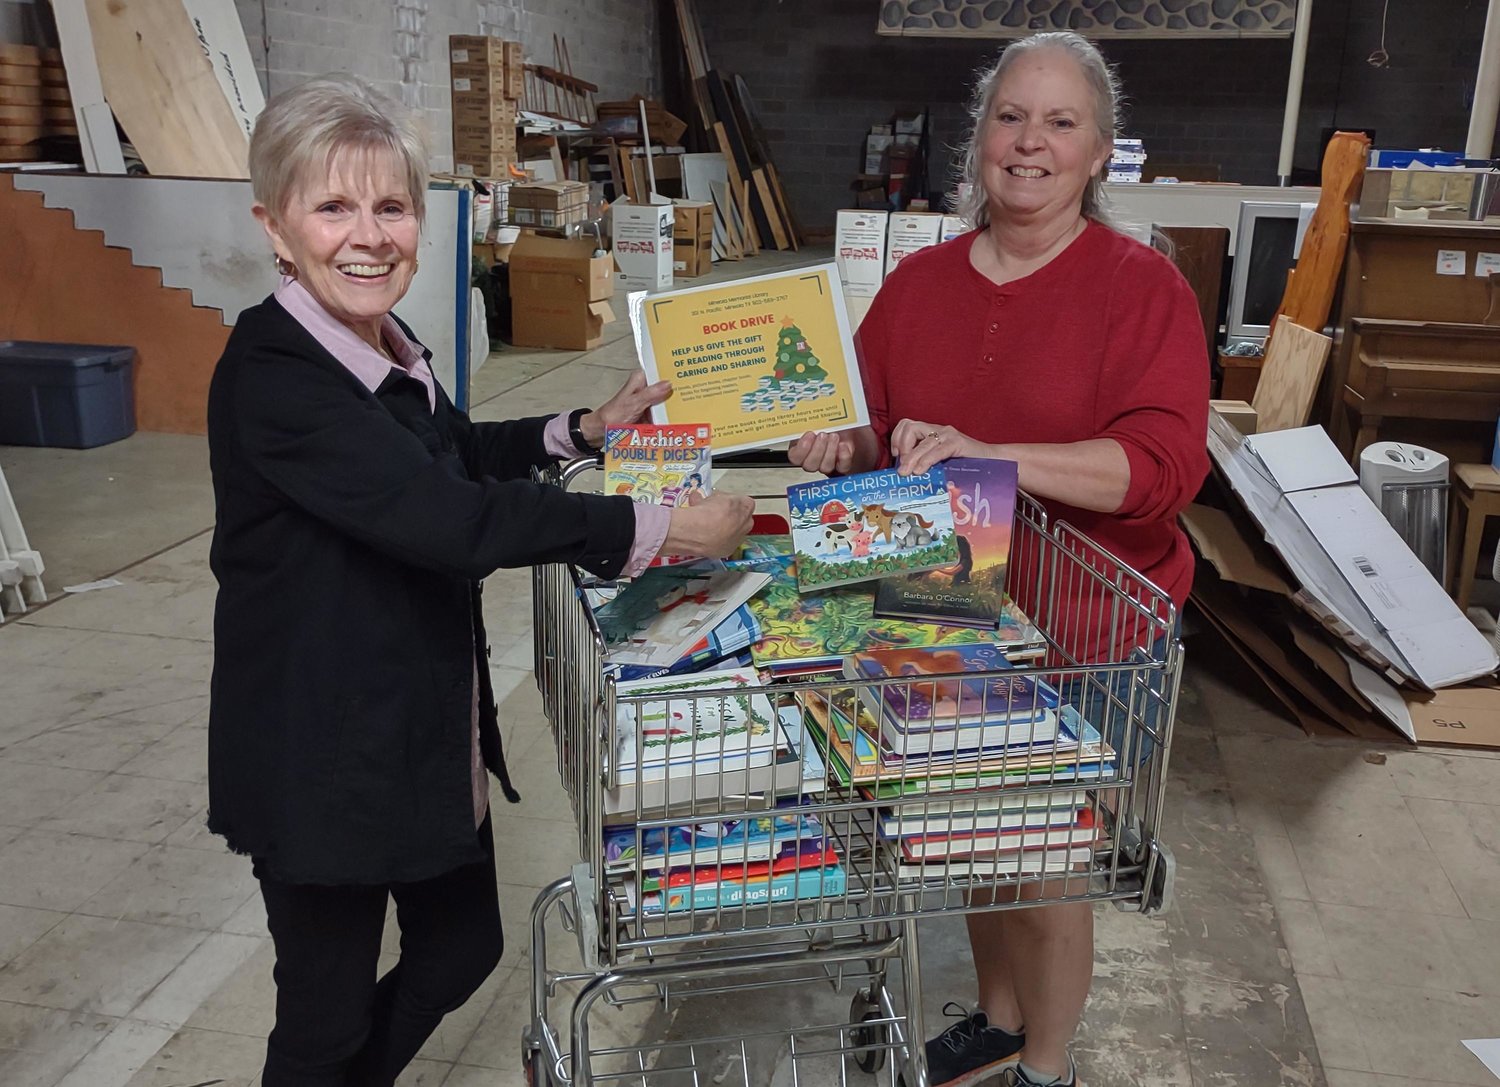 Mineola Memorial Library made a book donation to Mineola Caring and Sharing. Beth Shockey, Caring and Sharing, left, accepts from Mary Hurley, Mineola Memorial Library.